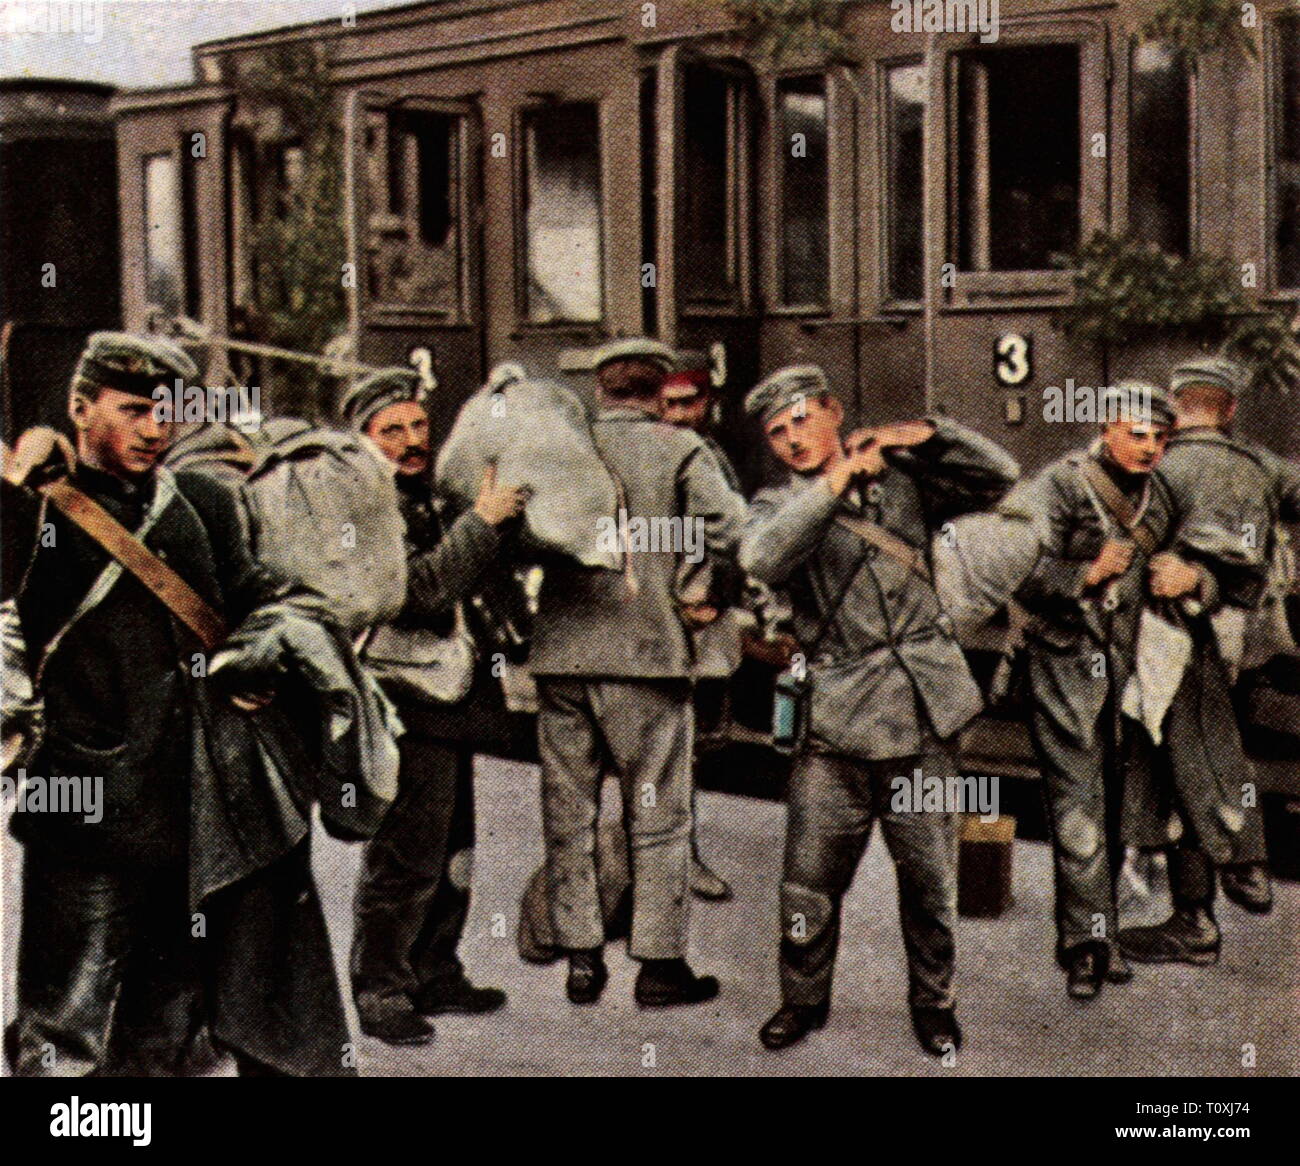 First World War / WWI, prisoners of war, home coming of the first German prisoners of war, 9.9.1919, coloured photograph, cigarette card, series 'Die Nachkriegszeit', 1935, captives, captivity, captivities, captive, comeback, railway, railroad, railways, railroads, transport, soldiers, soldier, repatriates, people, Germany, German Reich, Weimar Republic, 1910s, 20th century, 1930s, world war, world wars, home coming, homecoming, return home, first, 1st, prisoner of war, prisoners of war, coloured, colored, post war period, post-war period, post-w, Additional-Rights-Clearance-Info-Not-Available Stock Photo